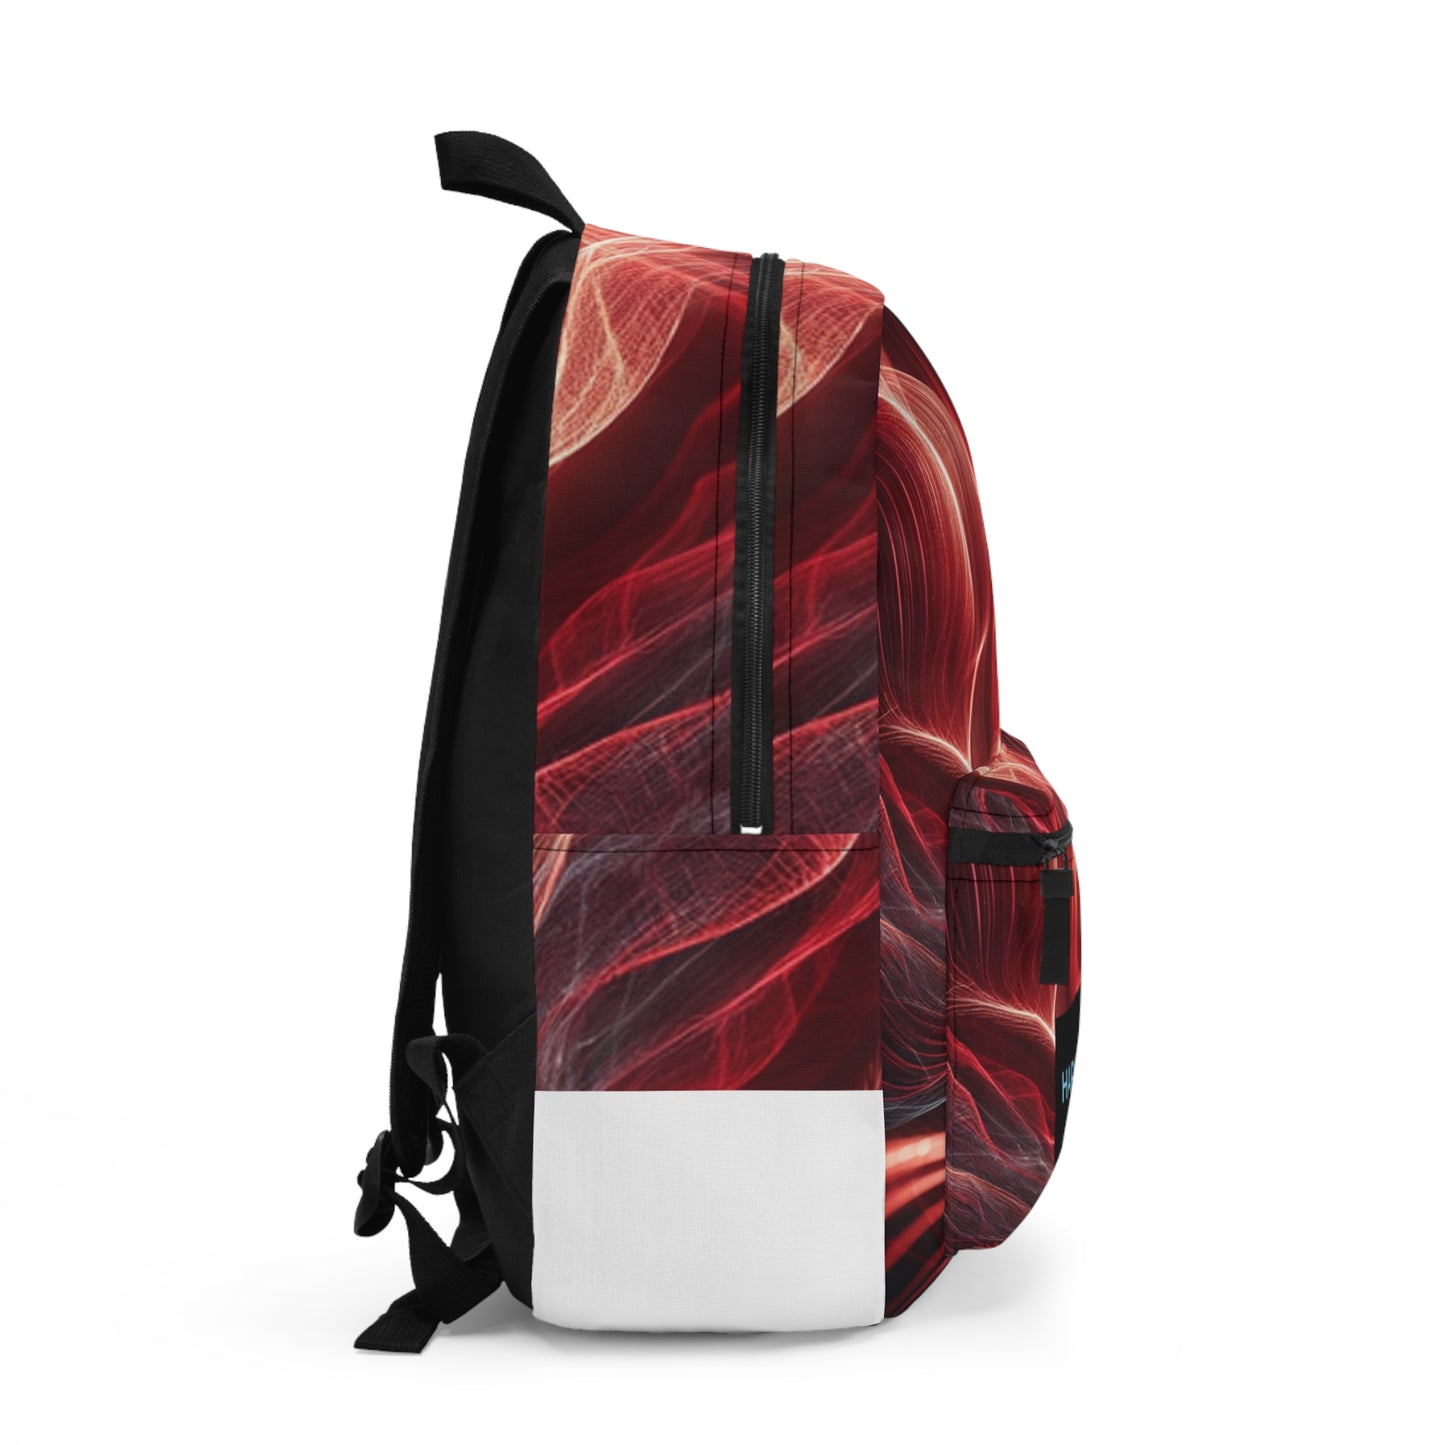 Giovanni del Melone - Backpack